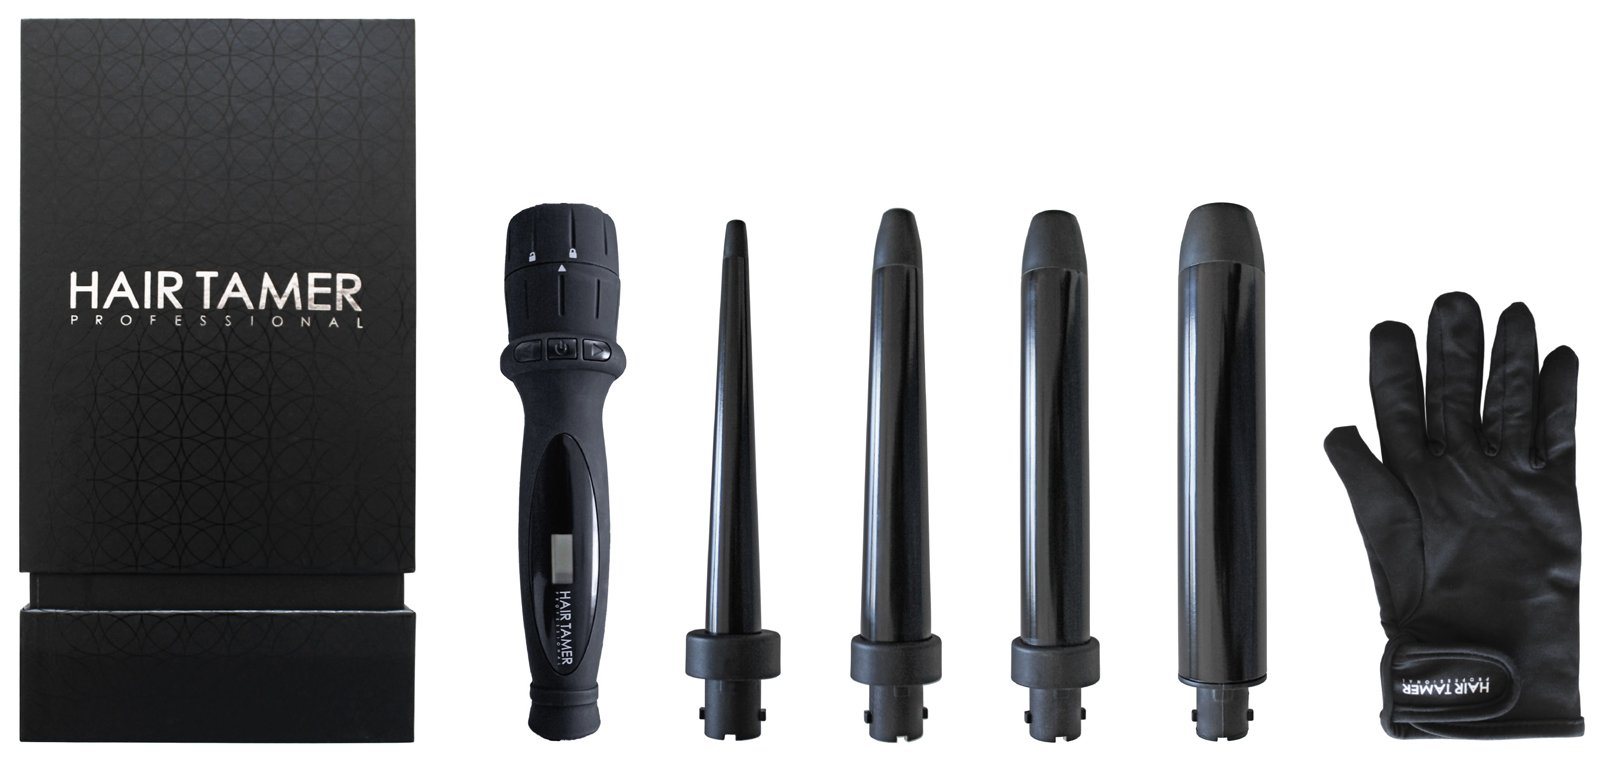 Hair Tamer 4-in-1 Clipless Curling Iron Set